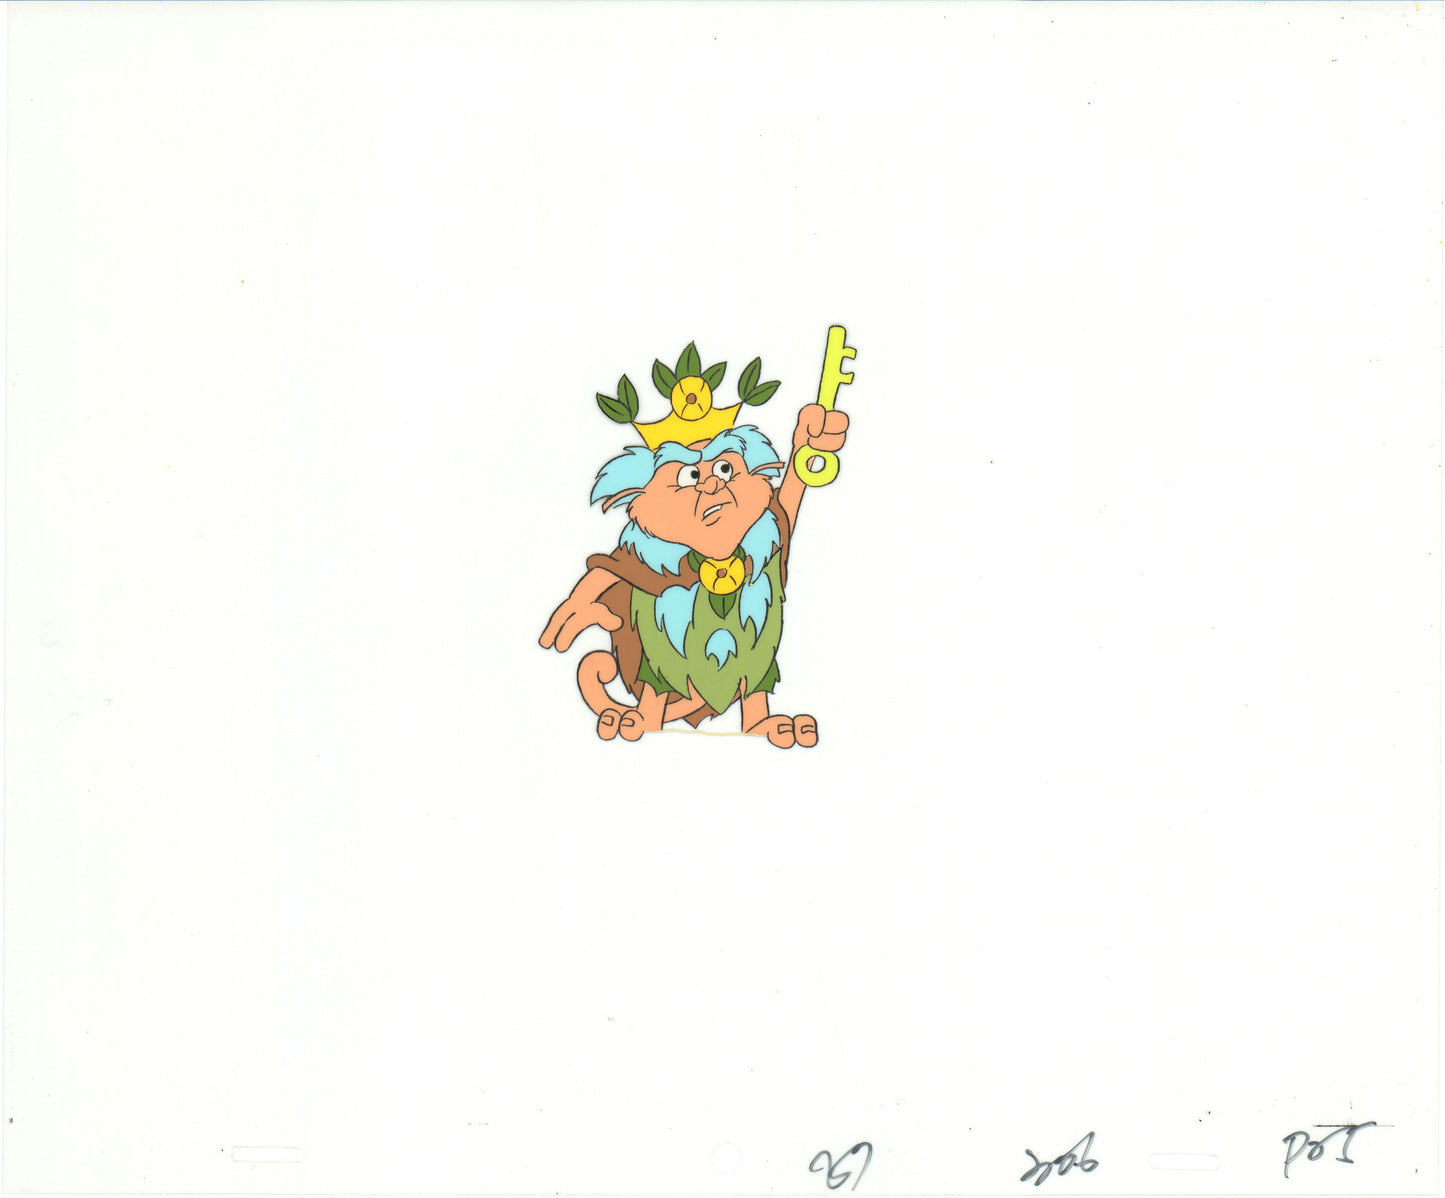 Star Wars: Ewoks Original Production Animation Cel and Drawing from Lucasfilm b5341